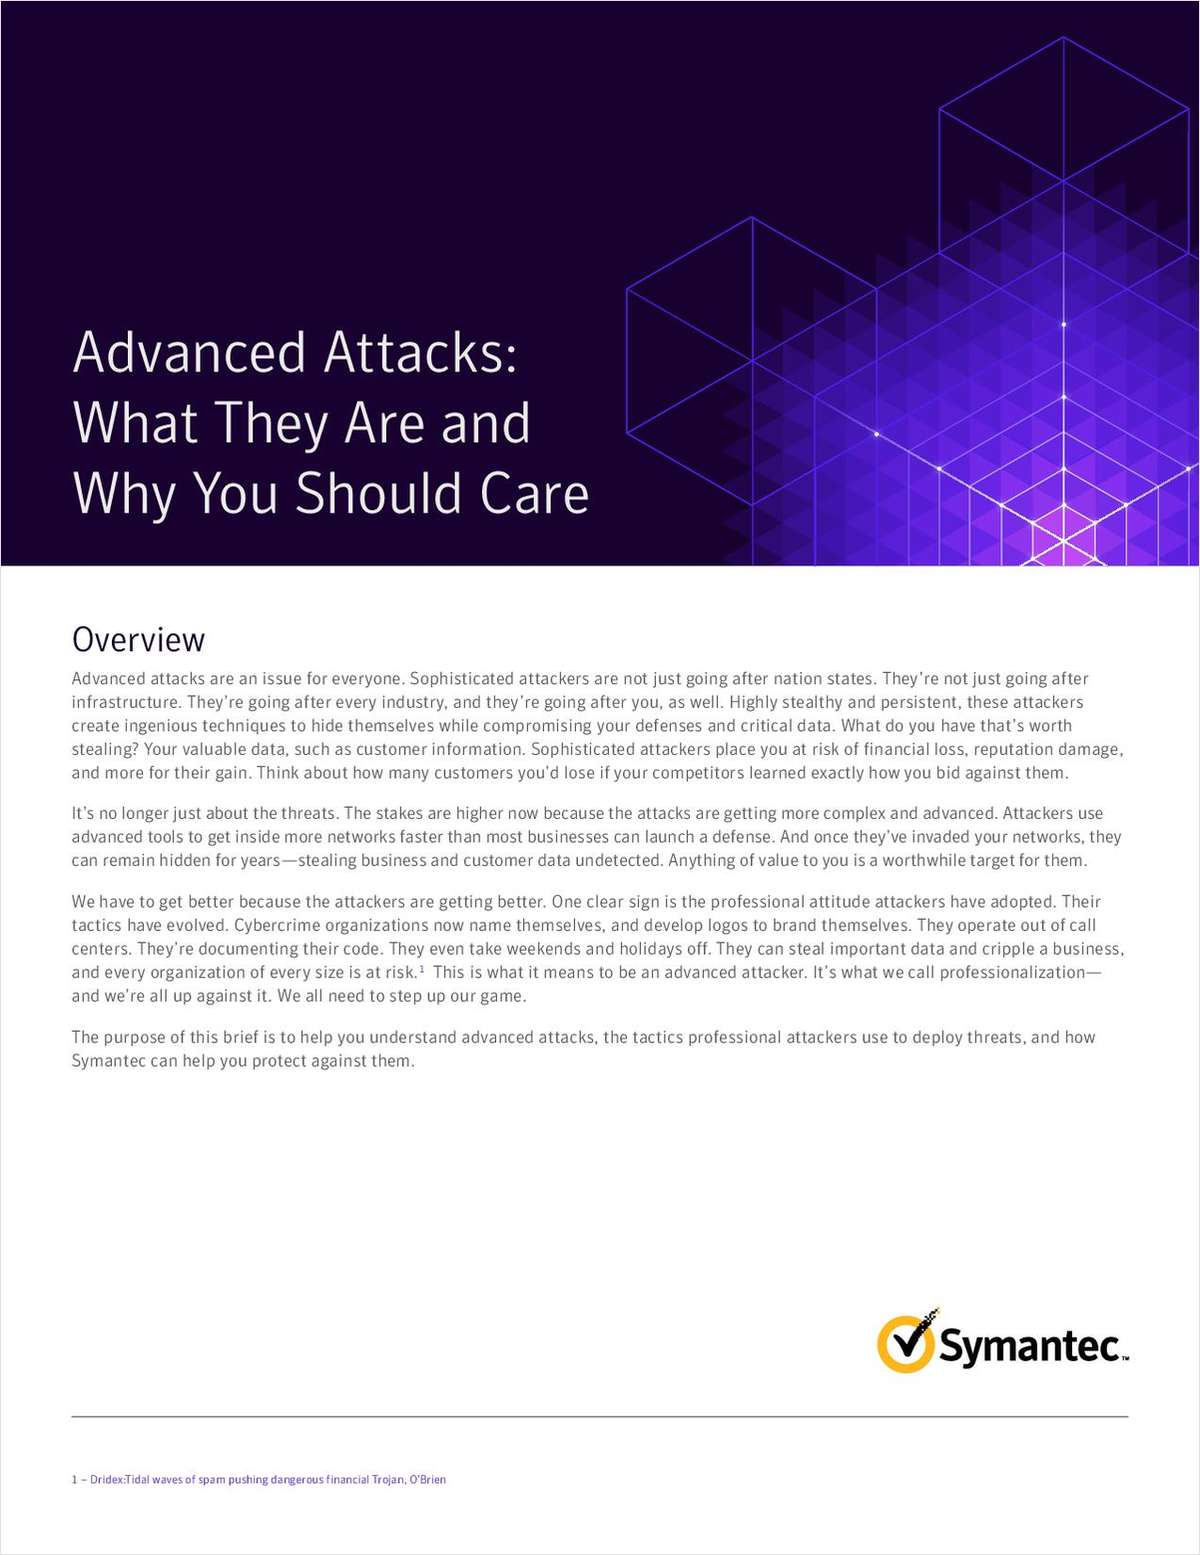 Advanced Attacks: What They Are and Why You Should Care